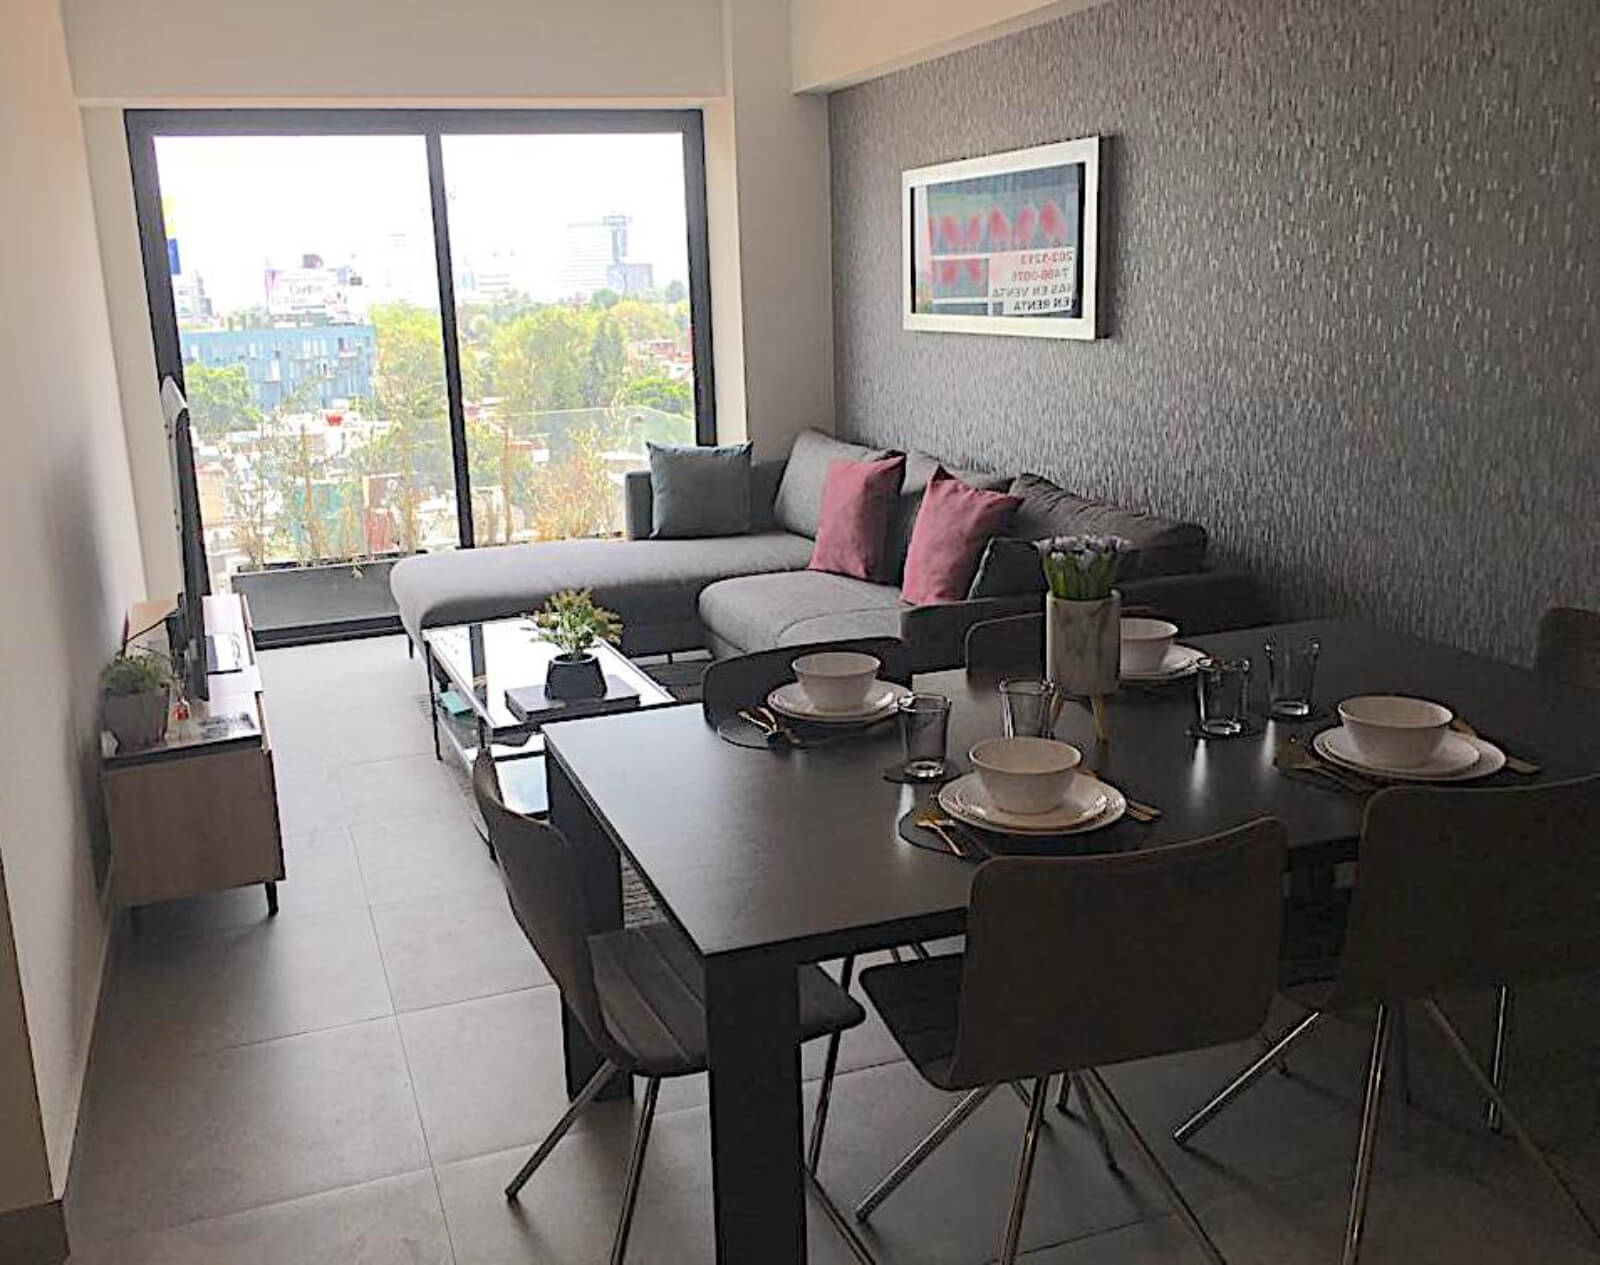 Apartment with playground, adult area, pet-friendly, gym for sale in CDMX.